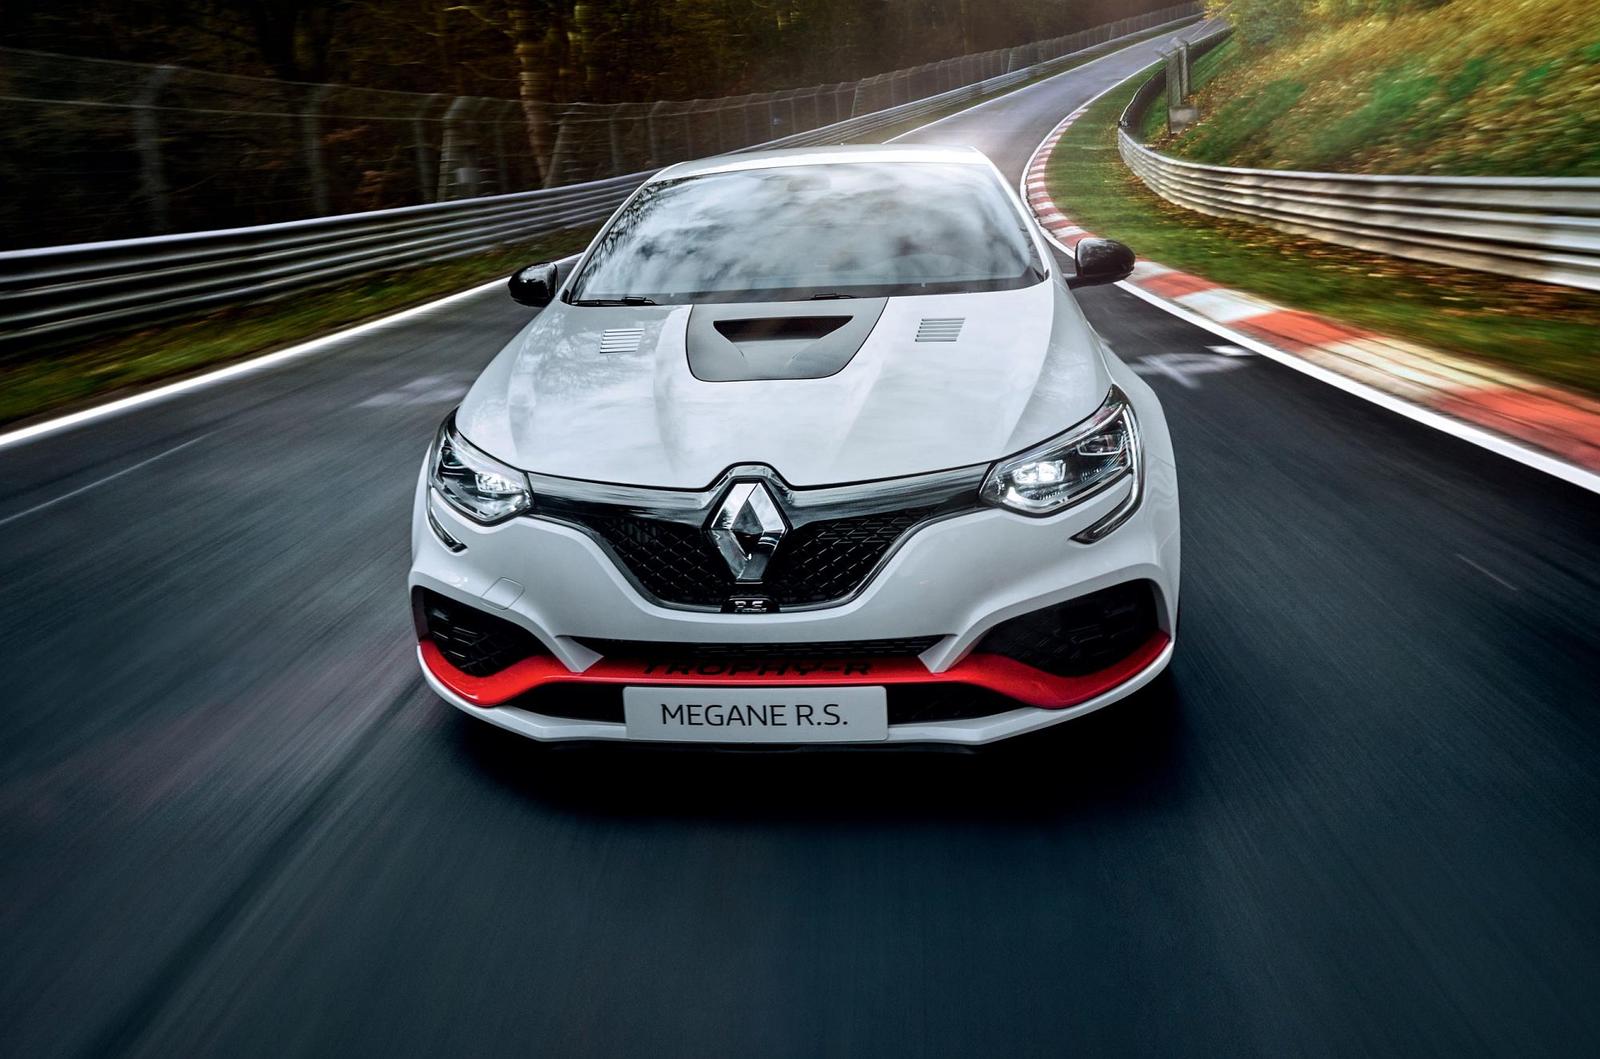 New Mégane R.S. Trophy-R fastest ever front-wheel-drive production car at the Nürburgring EMBARGO 14h00 210519 (2)